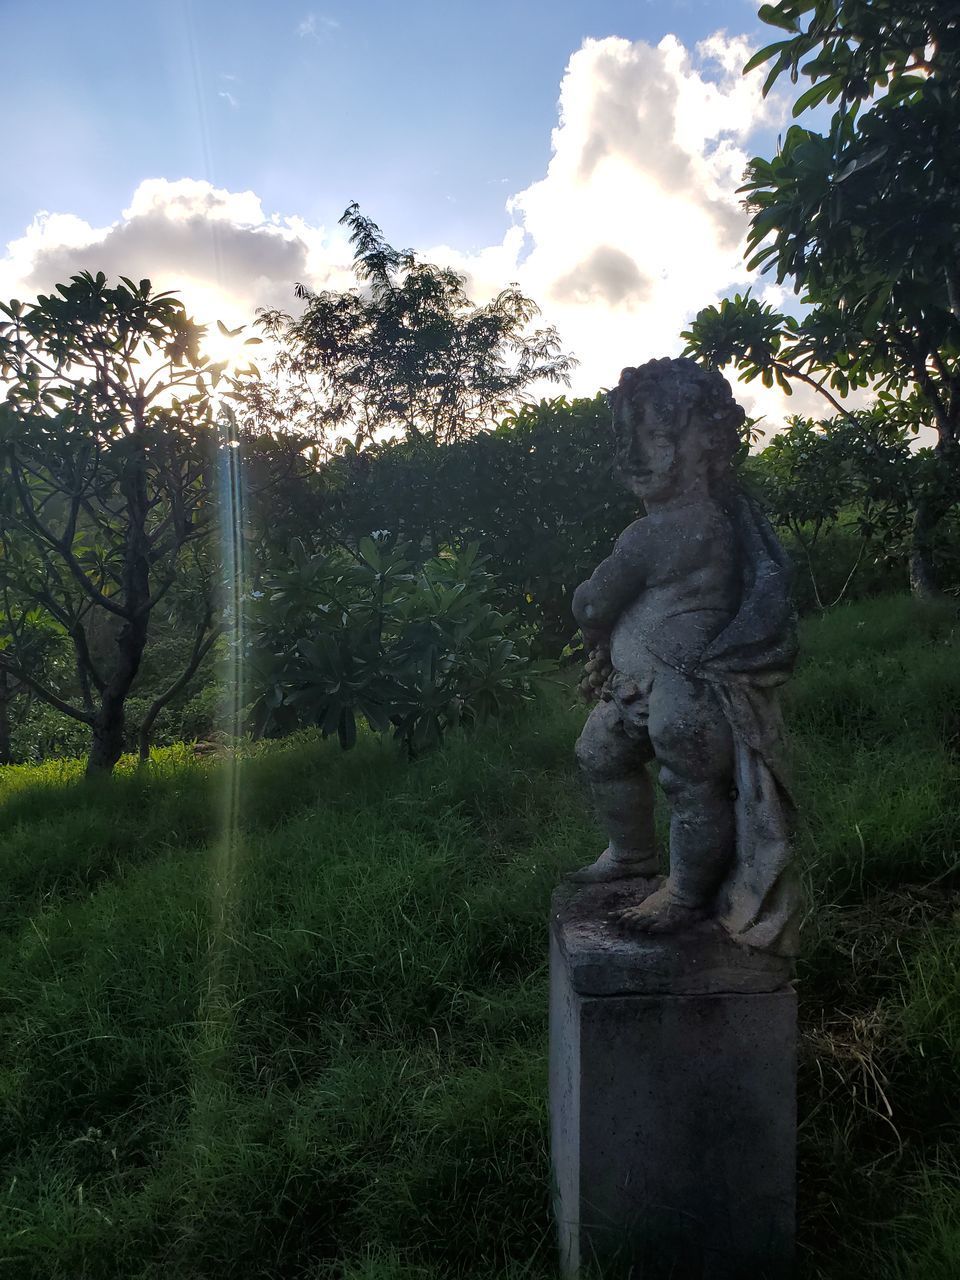 STATUE ON FIELD AGAINST TREES